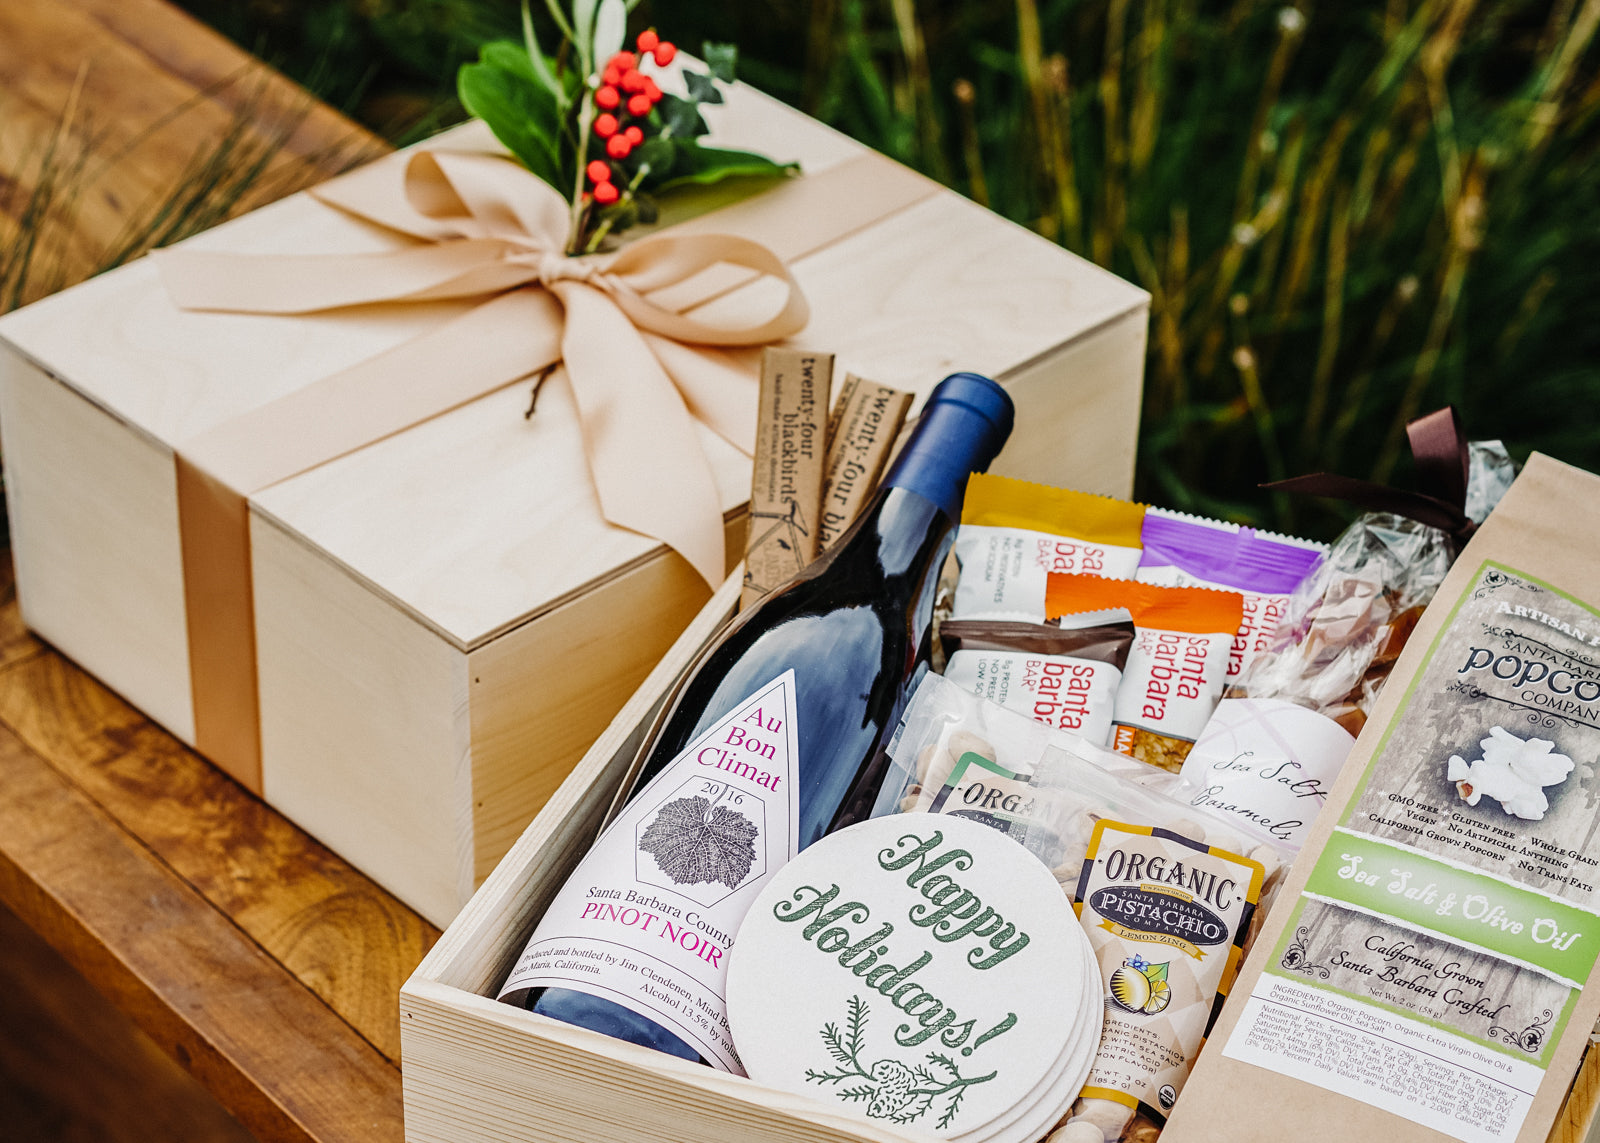 Santa Barbara wine and snacks in a curated gift basket